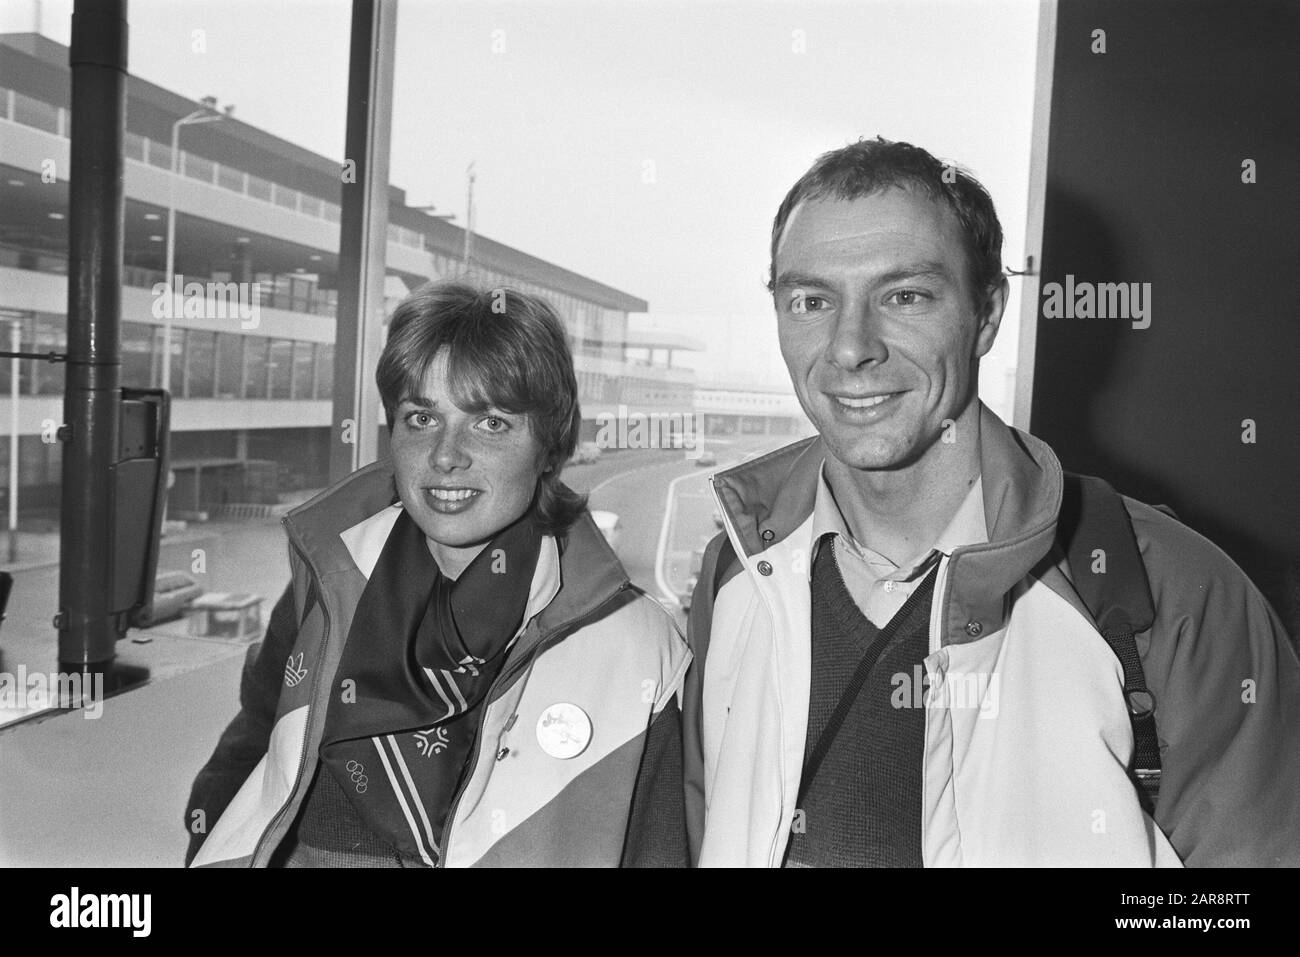 Return Olympic team from Sarajevo at Schiphol Airport; Ria Visser and Hilbert van der Thumb upon arrival Date: 20 February 1984 Location: Noord-Holland, Schiphol Keywords: skating, sport Personal name: Thumb, Hilbert van der, Fisherman, Ria Stock Photo